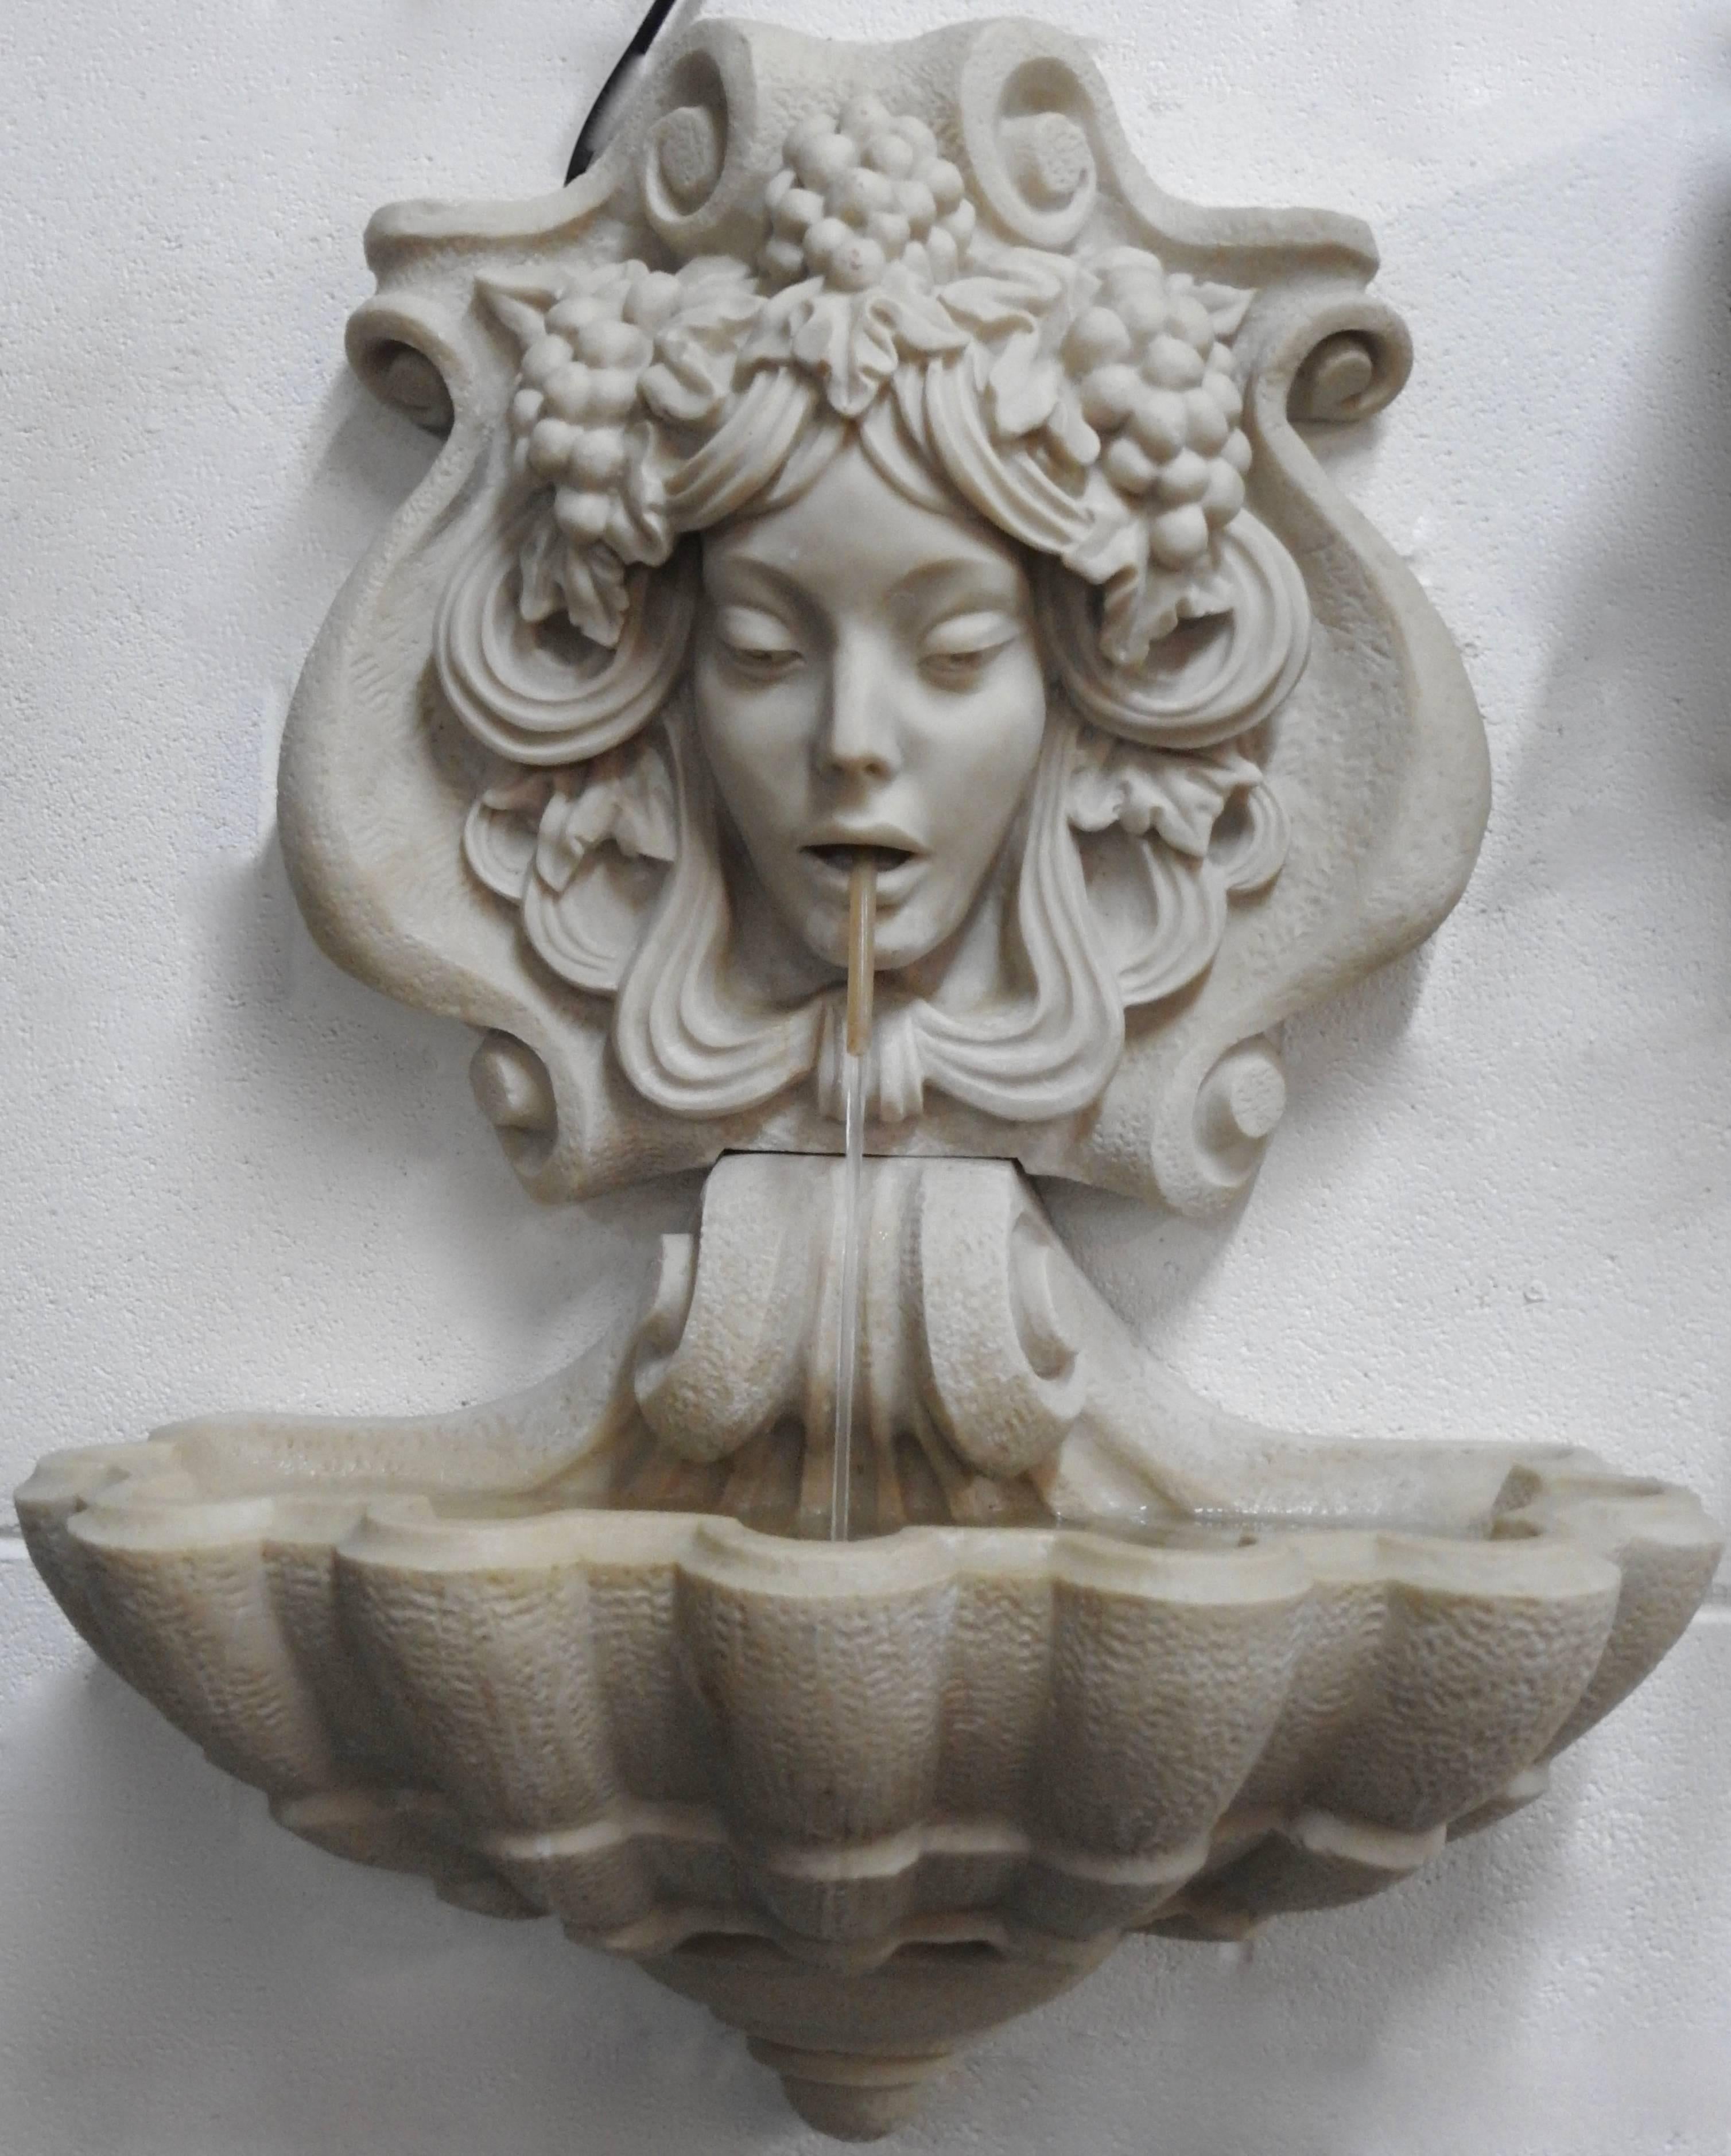 This lovely lady that forms a wall fountain would be happy to adorn your surroundings. She is surrounded by grapes and waves of hair. The water flows from a tube in her mouth to the shell style basin. The pump is included and is in working condition.